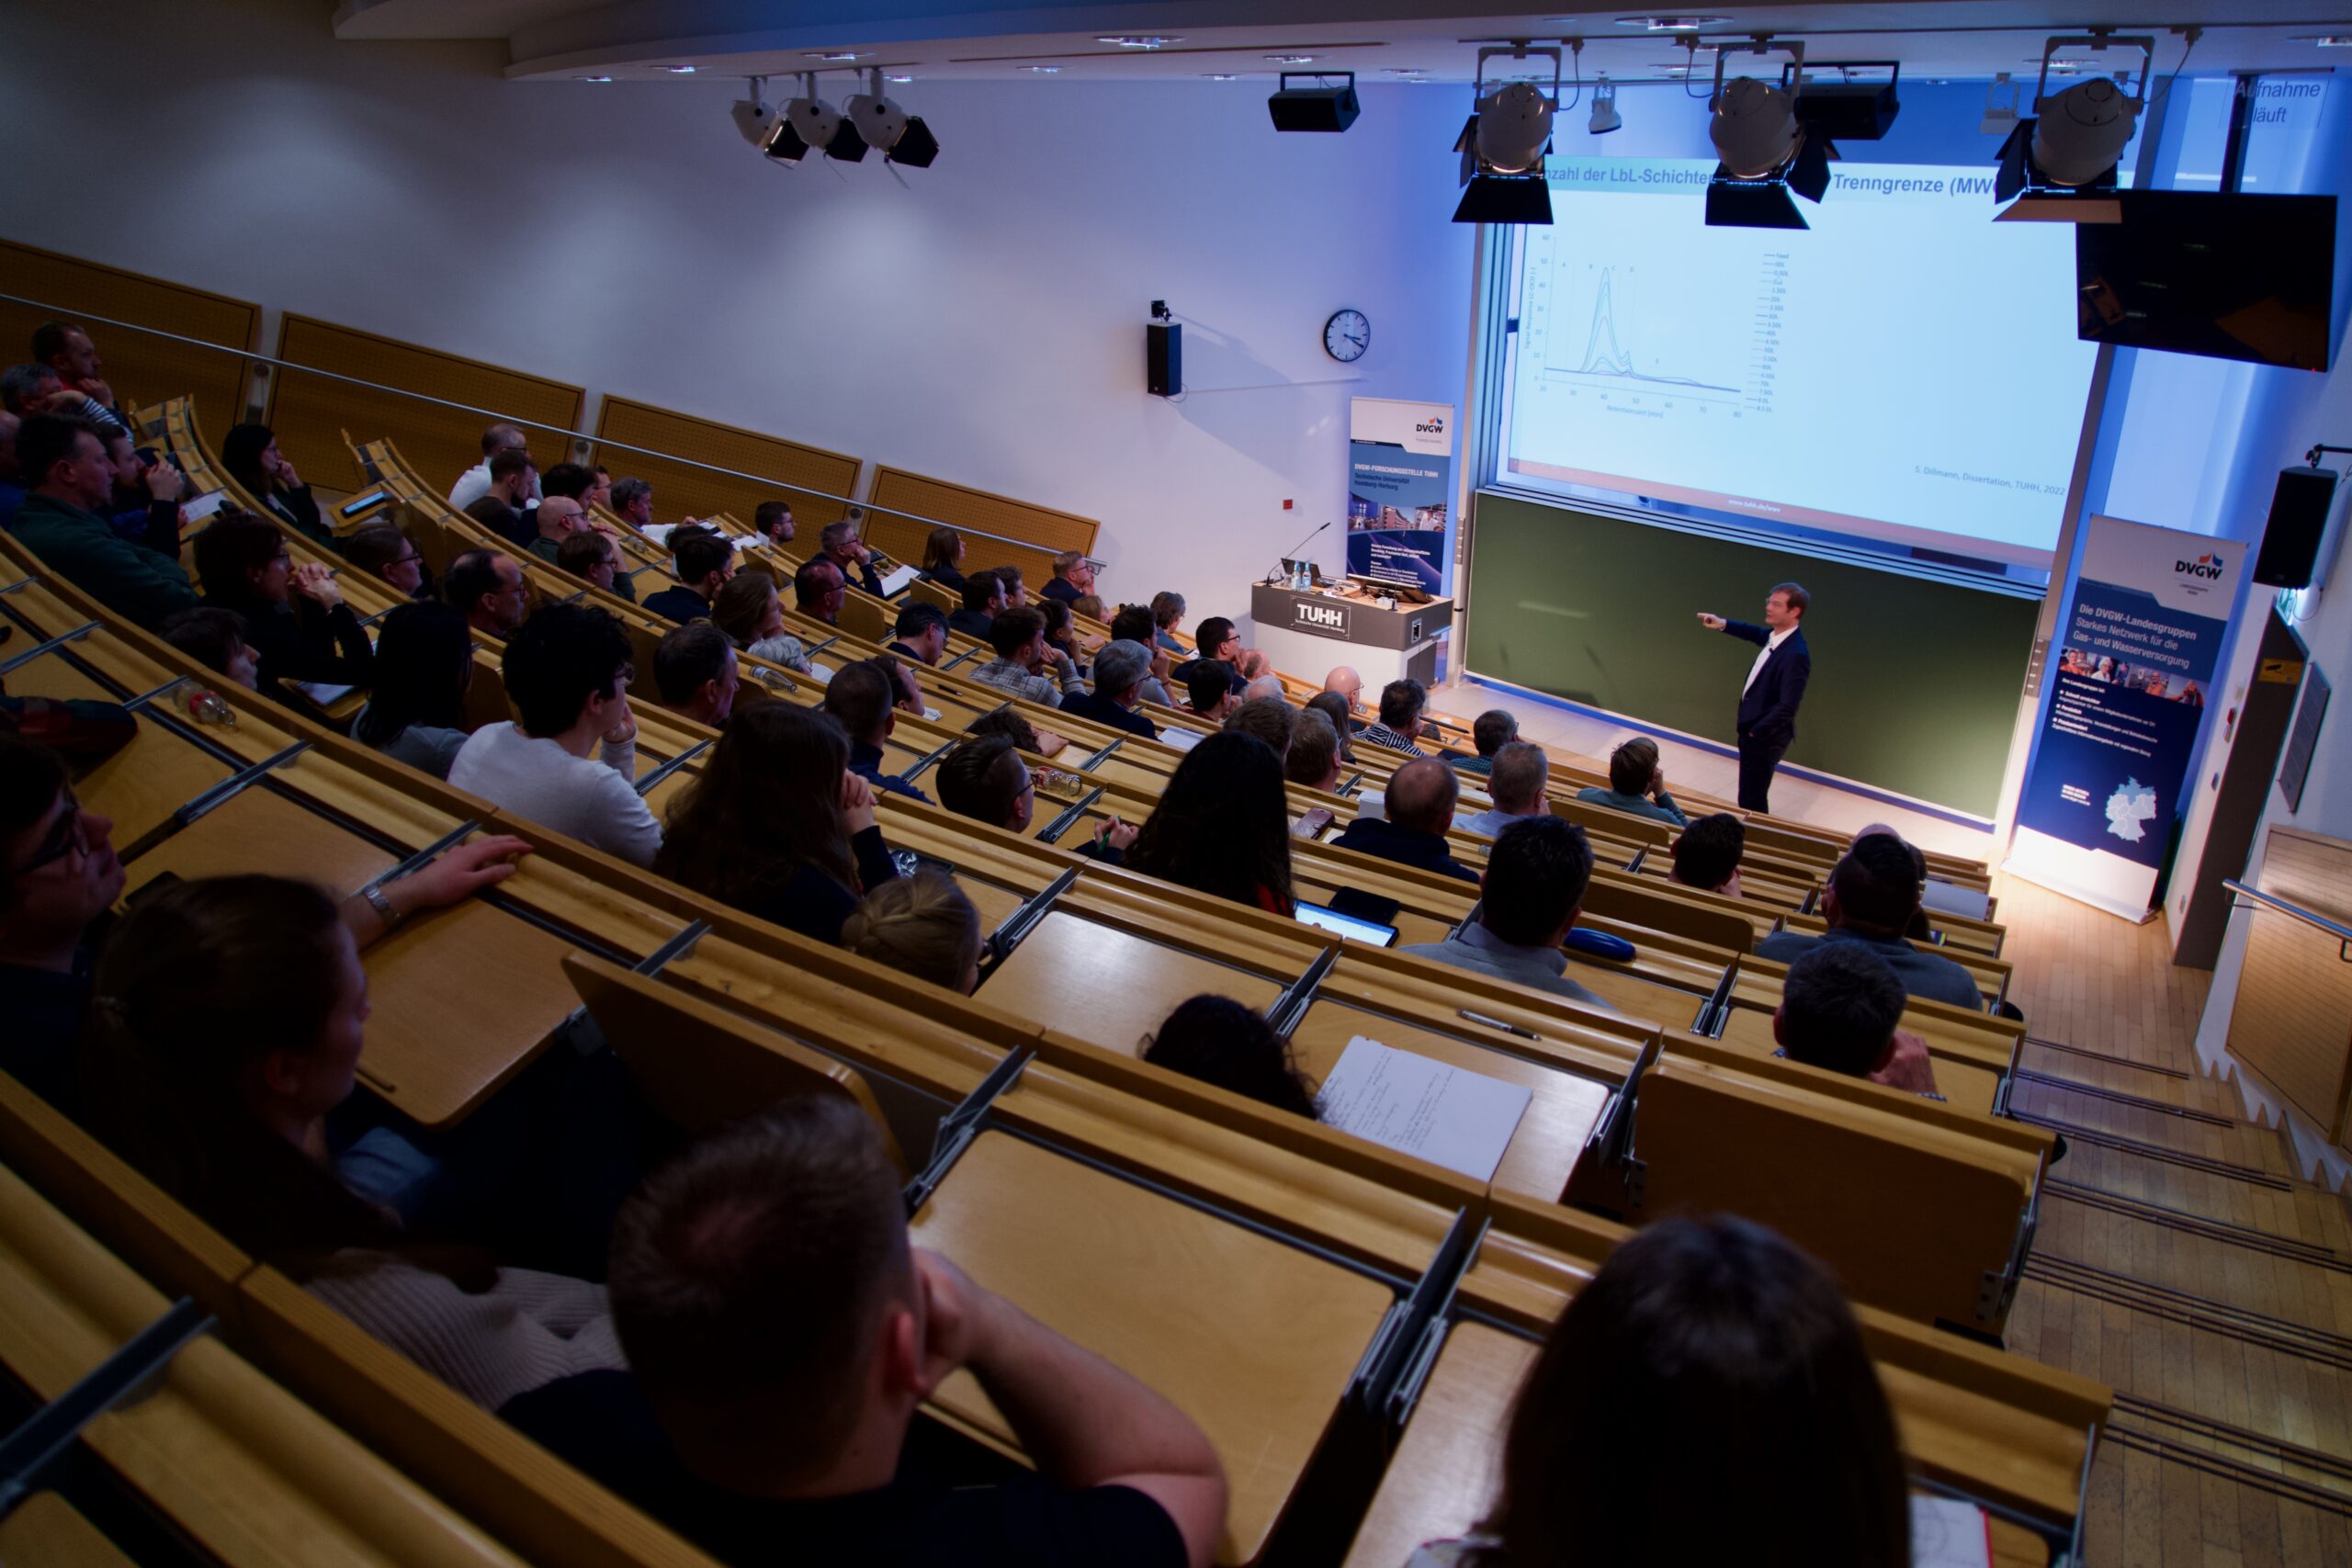 The photo shows Professor Mathias Ernst in the lecture hall at the TUHH in front of an interested audience.